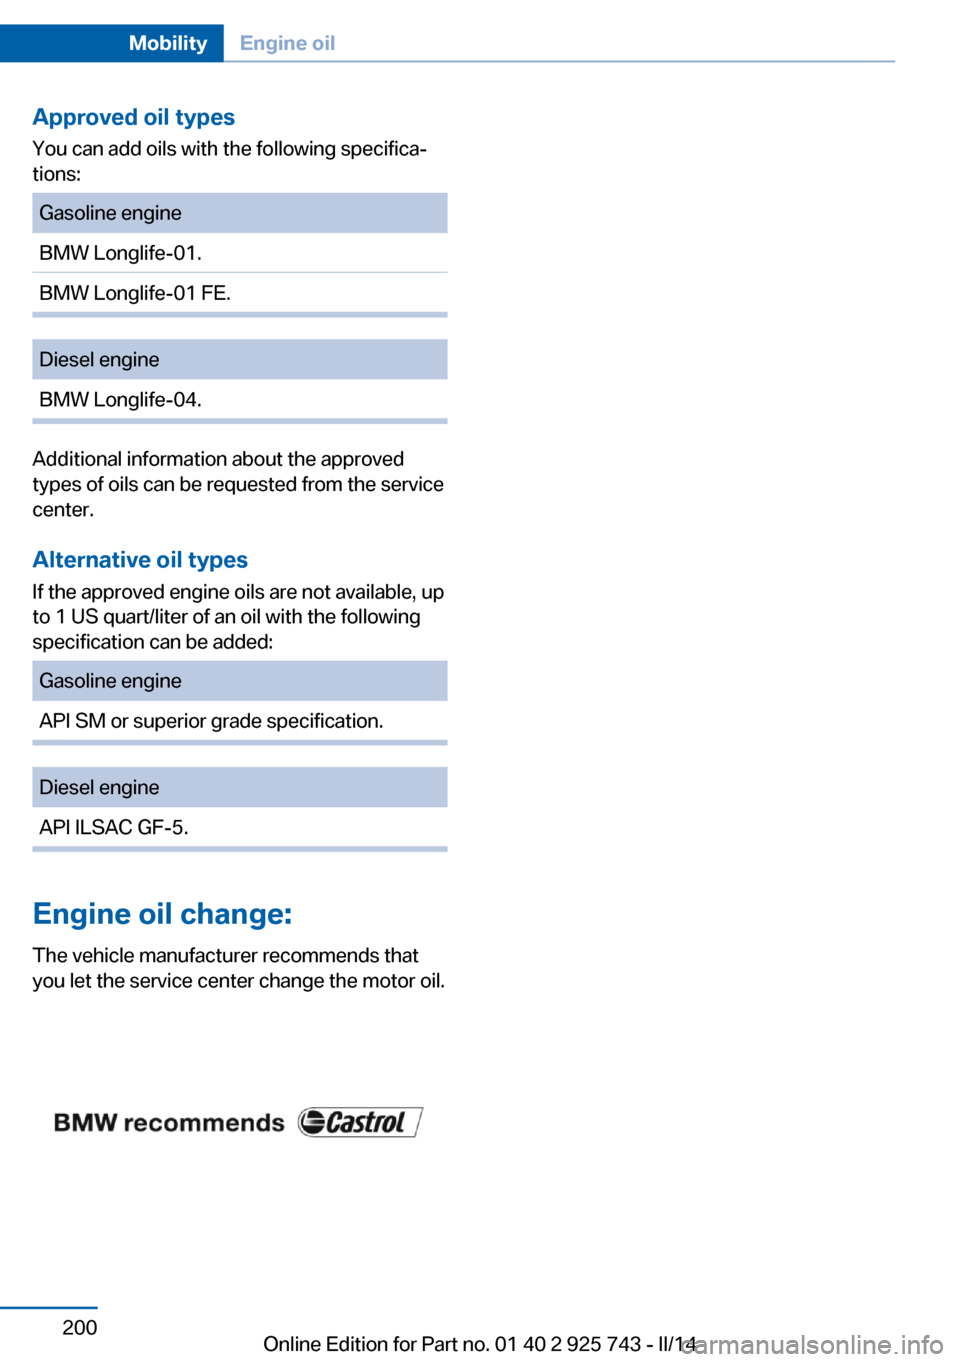 BMW 3 SERIES SEDAN 2014 F30 Owners Manual Approved oil typesYou can add oils with the following specifica‐
tions:Gasoline engineBMW Longlife-01.BMW Longlife-01 FE.Diesel engineBMW Longlife-04.
Additional information about the approved
types